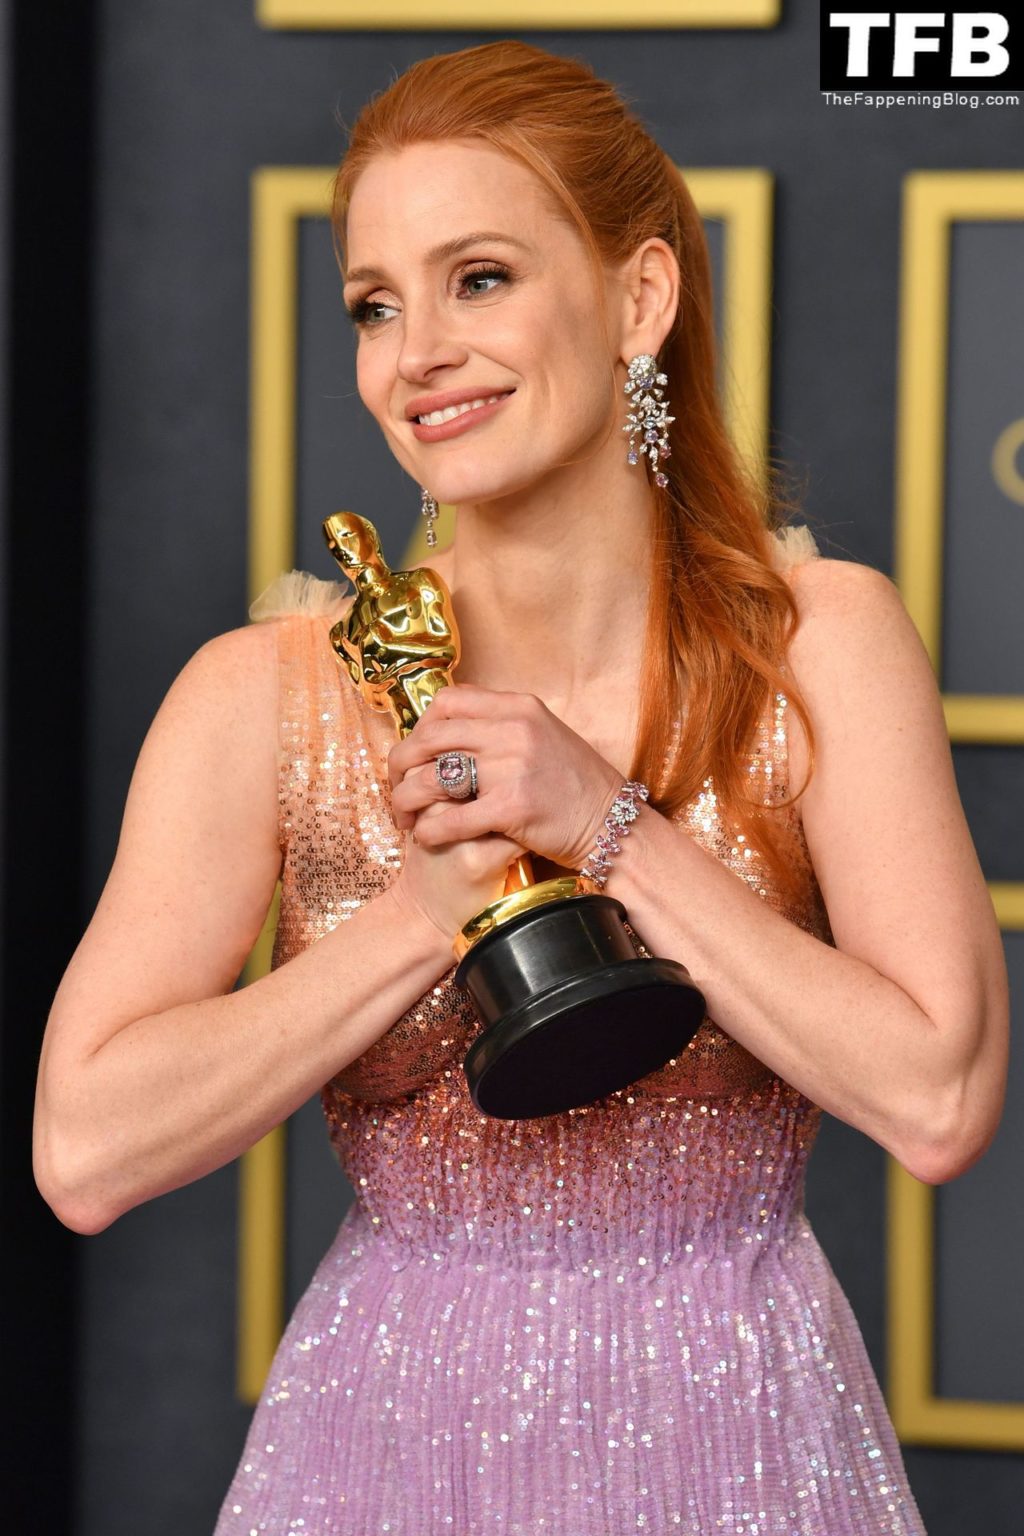 Jessica Chastain Sexy The Fappening Blog 27 2 1024x1536 - Jessica Chastain Poses With Her Oscar at the 94th Academy Awards (150 Photos)